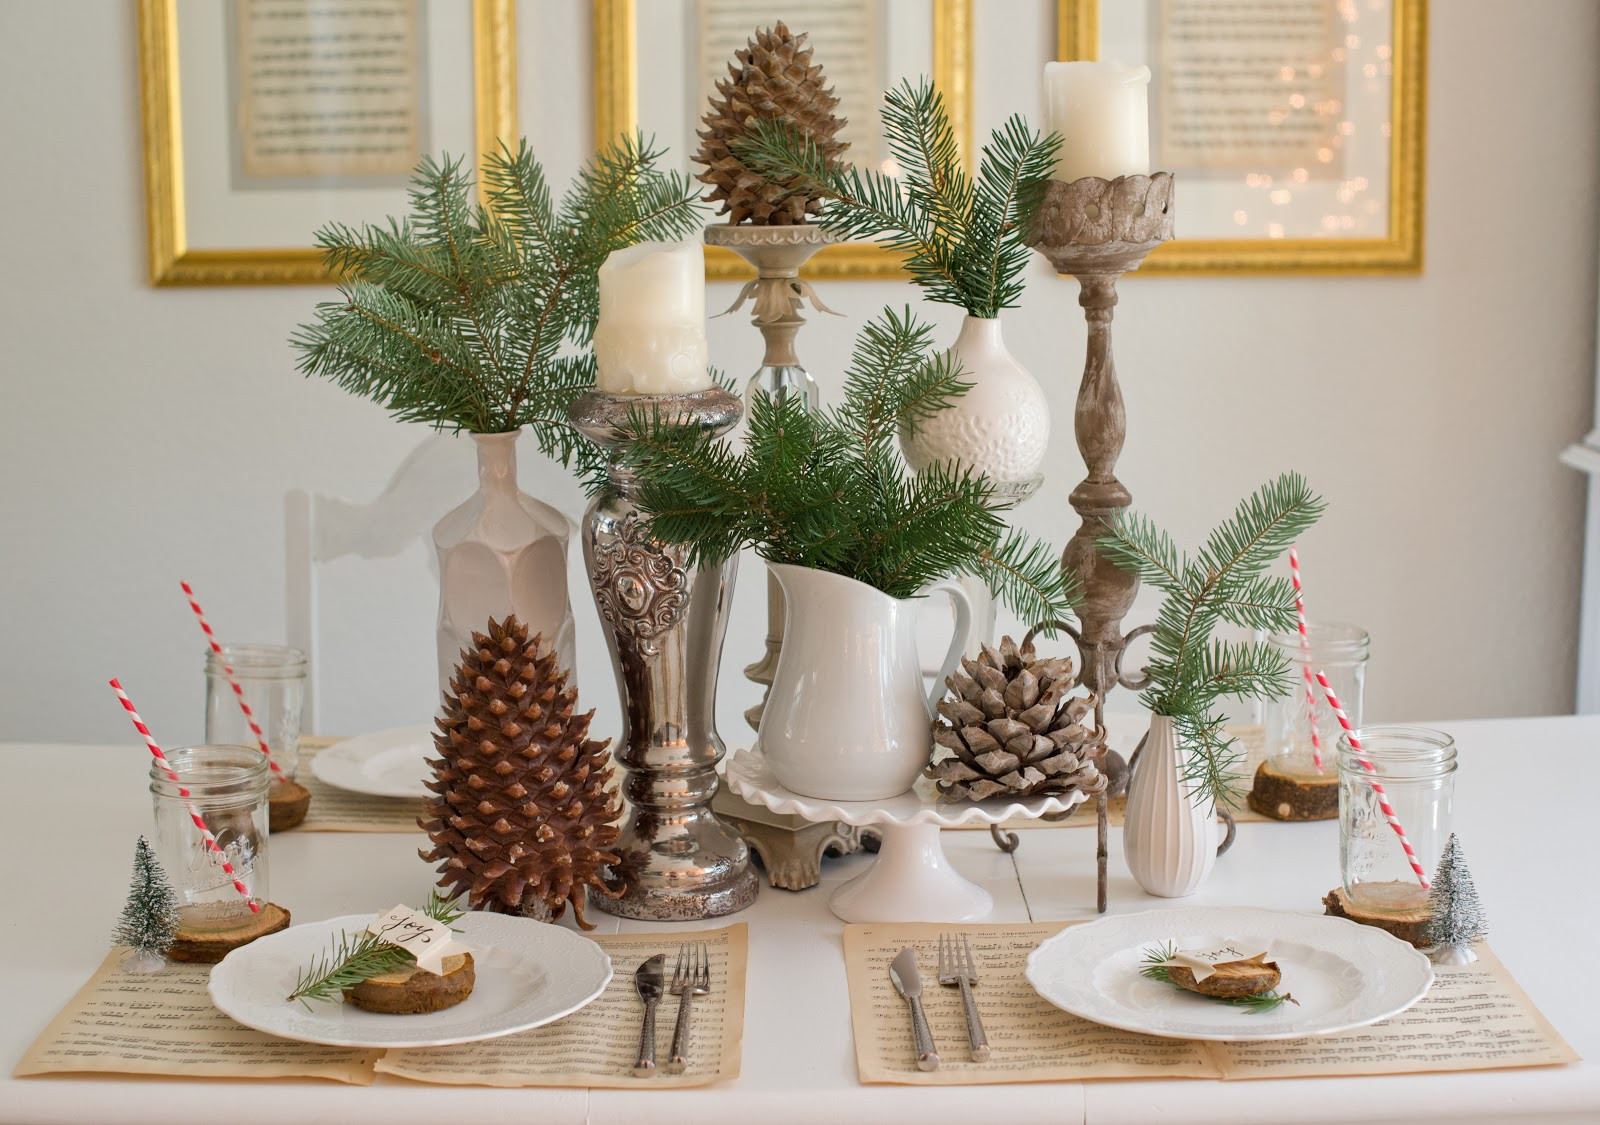 Christmas Table Centerpiece Ideas
 Domestic Fashionista Natural Christmas Tablescape